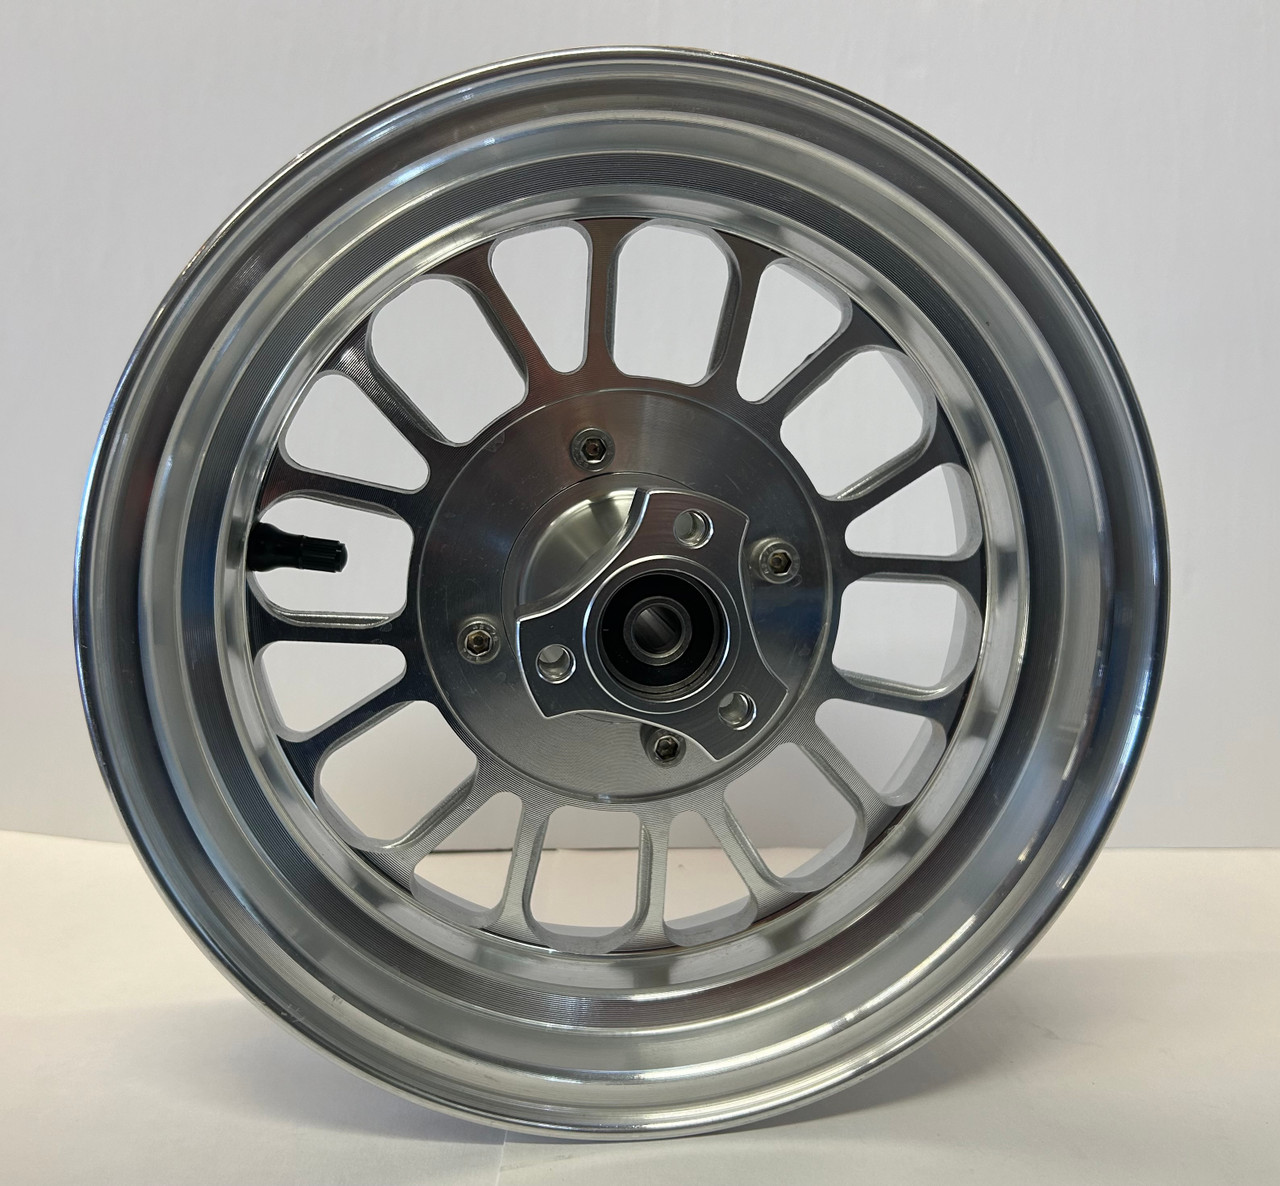 10 inch Mag aluminum wheel set. Both wheels 3.5 inches wide